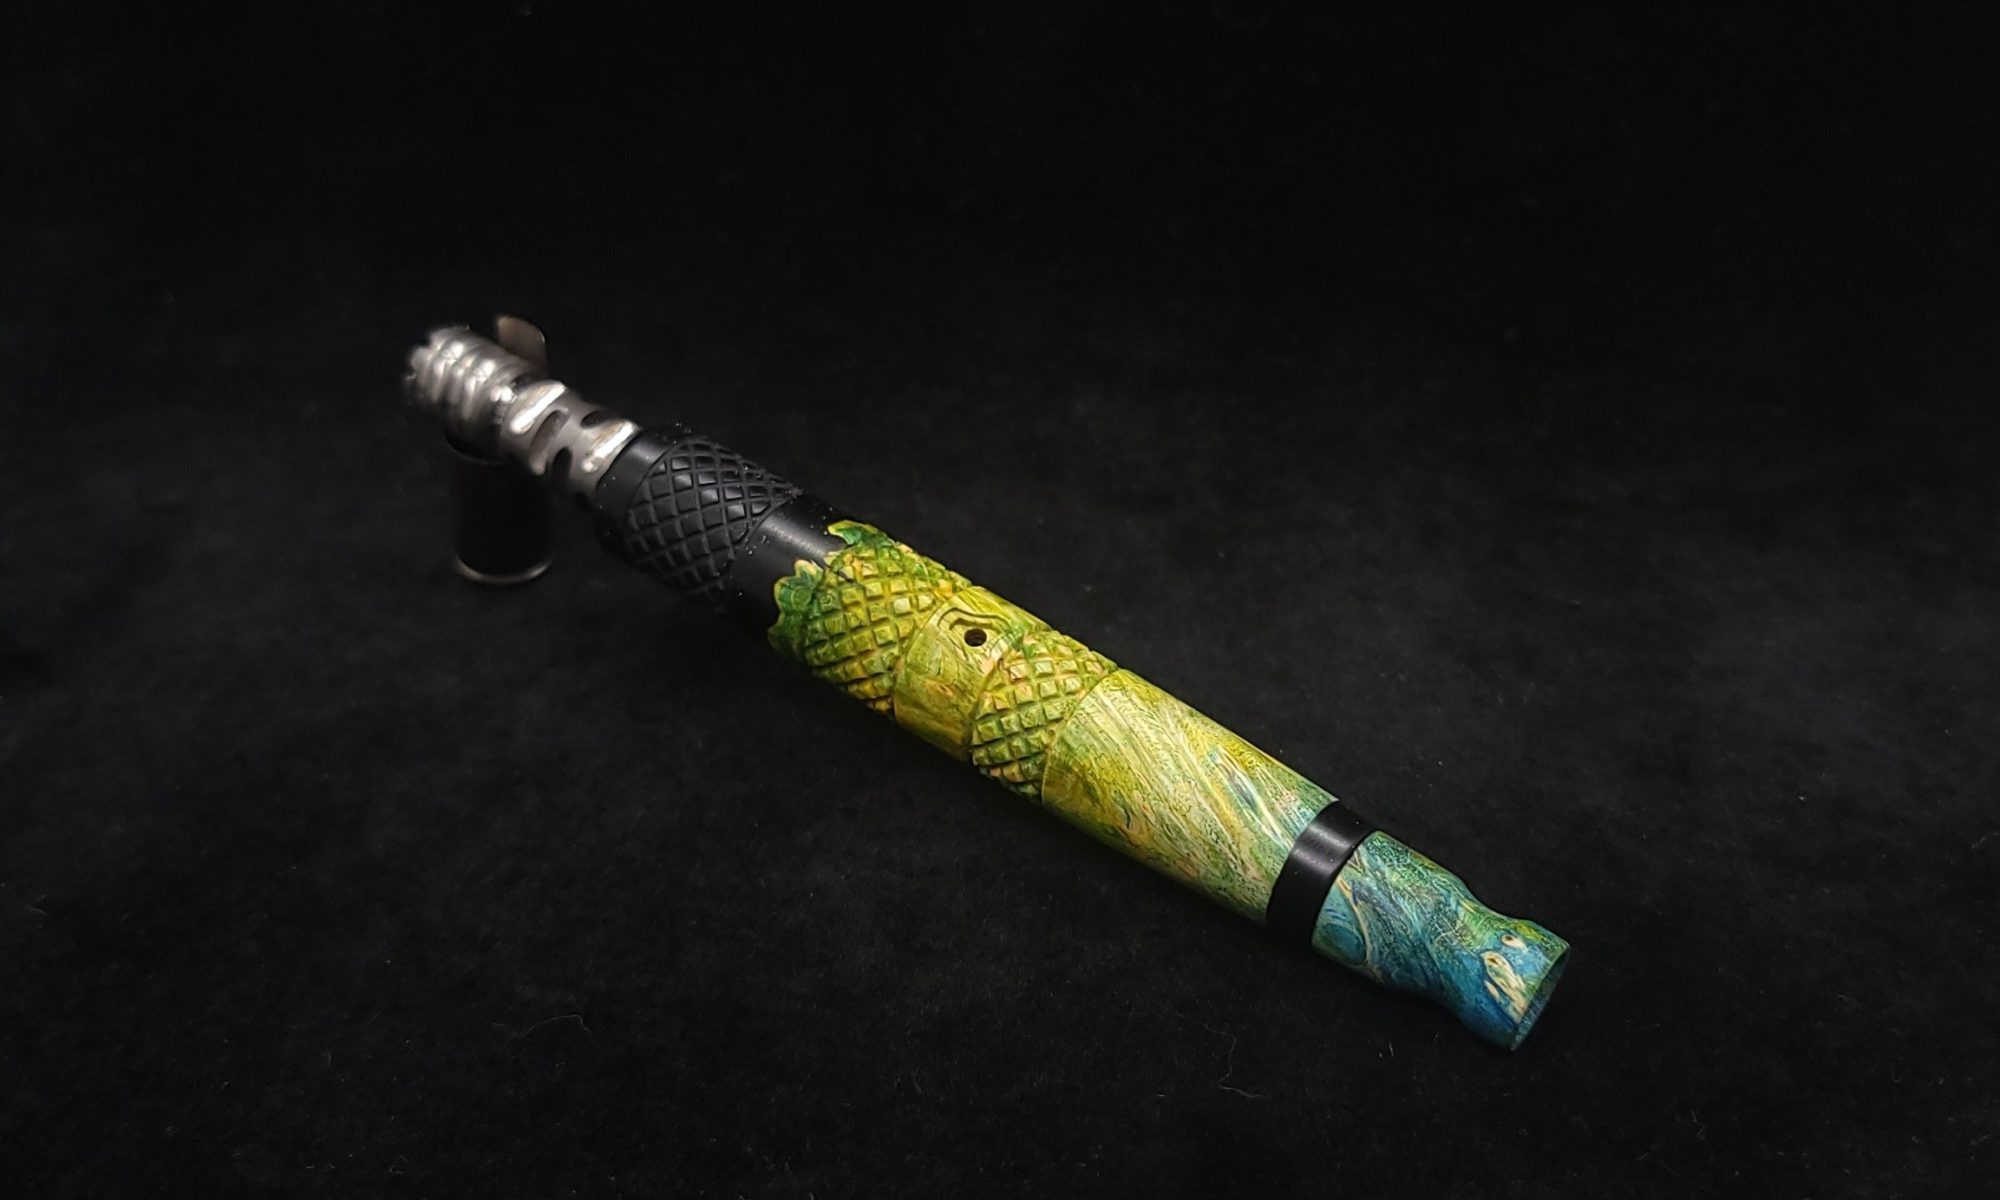 This image portrays High Class-Knurled XL Dynavap Stem/Metal Black Burl Hybrid + Matching Mouthpiece by Dovetail Woodwork.